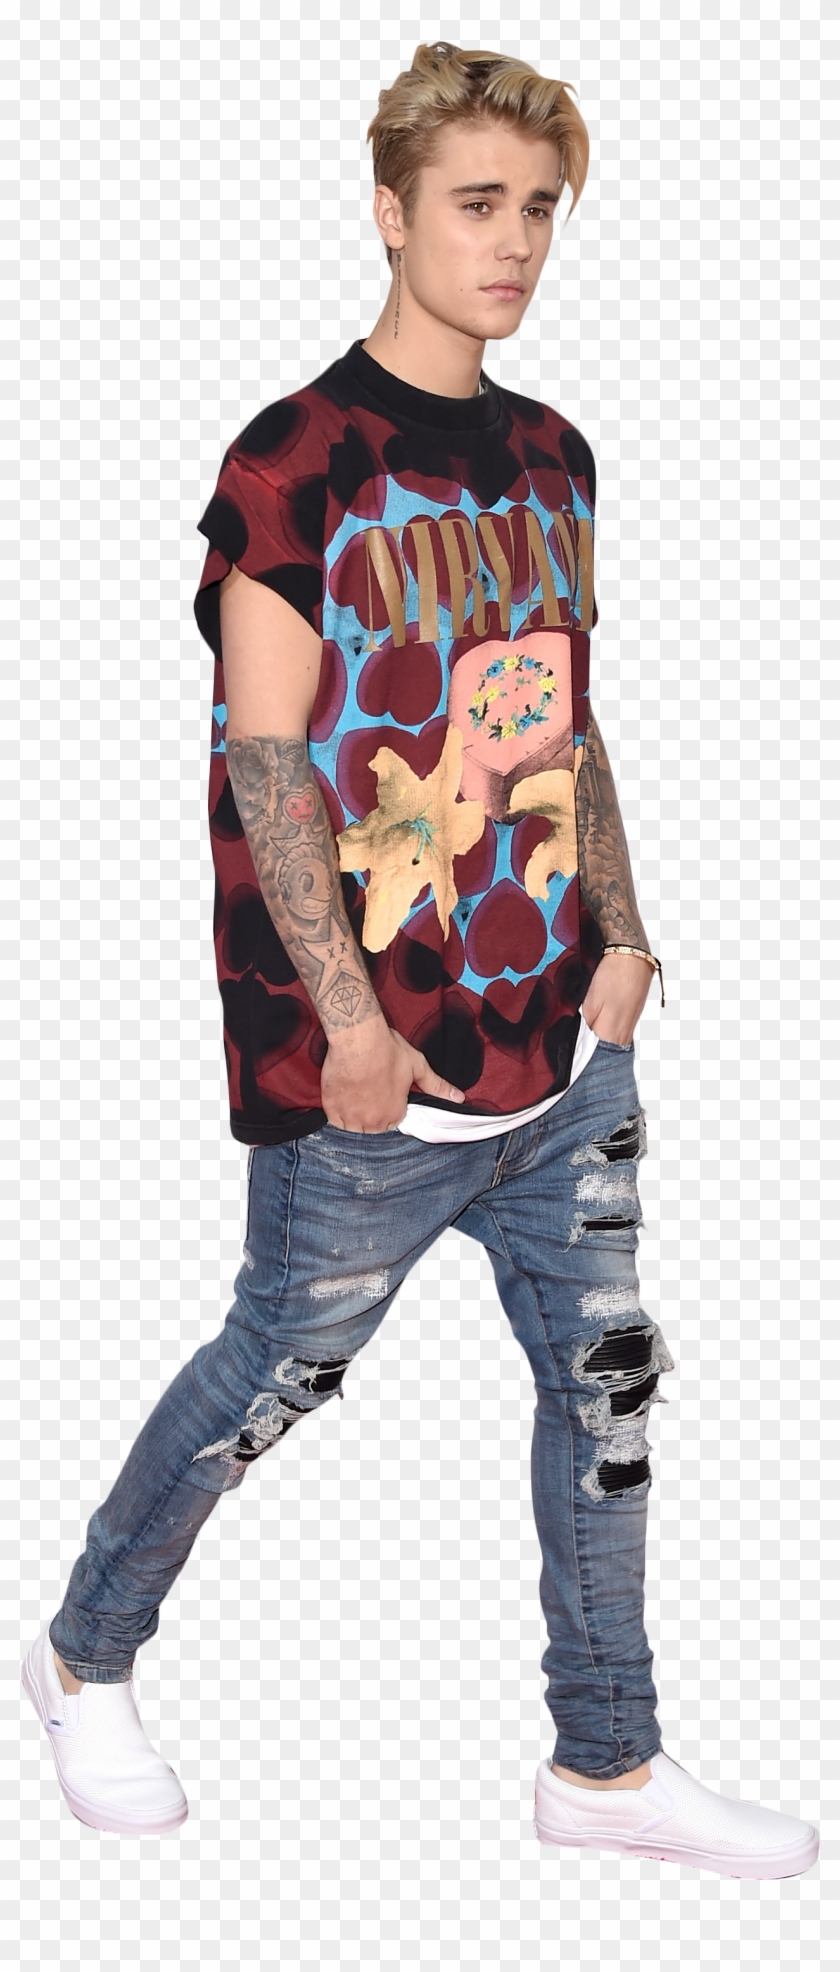 Justin Bieber Relaxed Png Image Clipart #389971